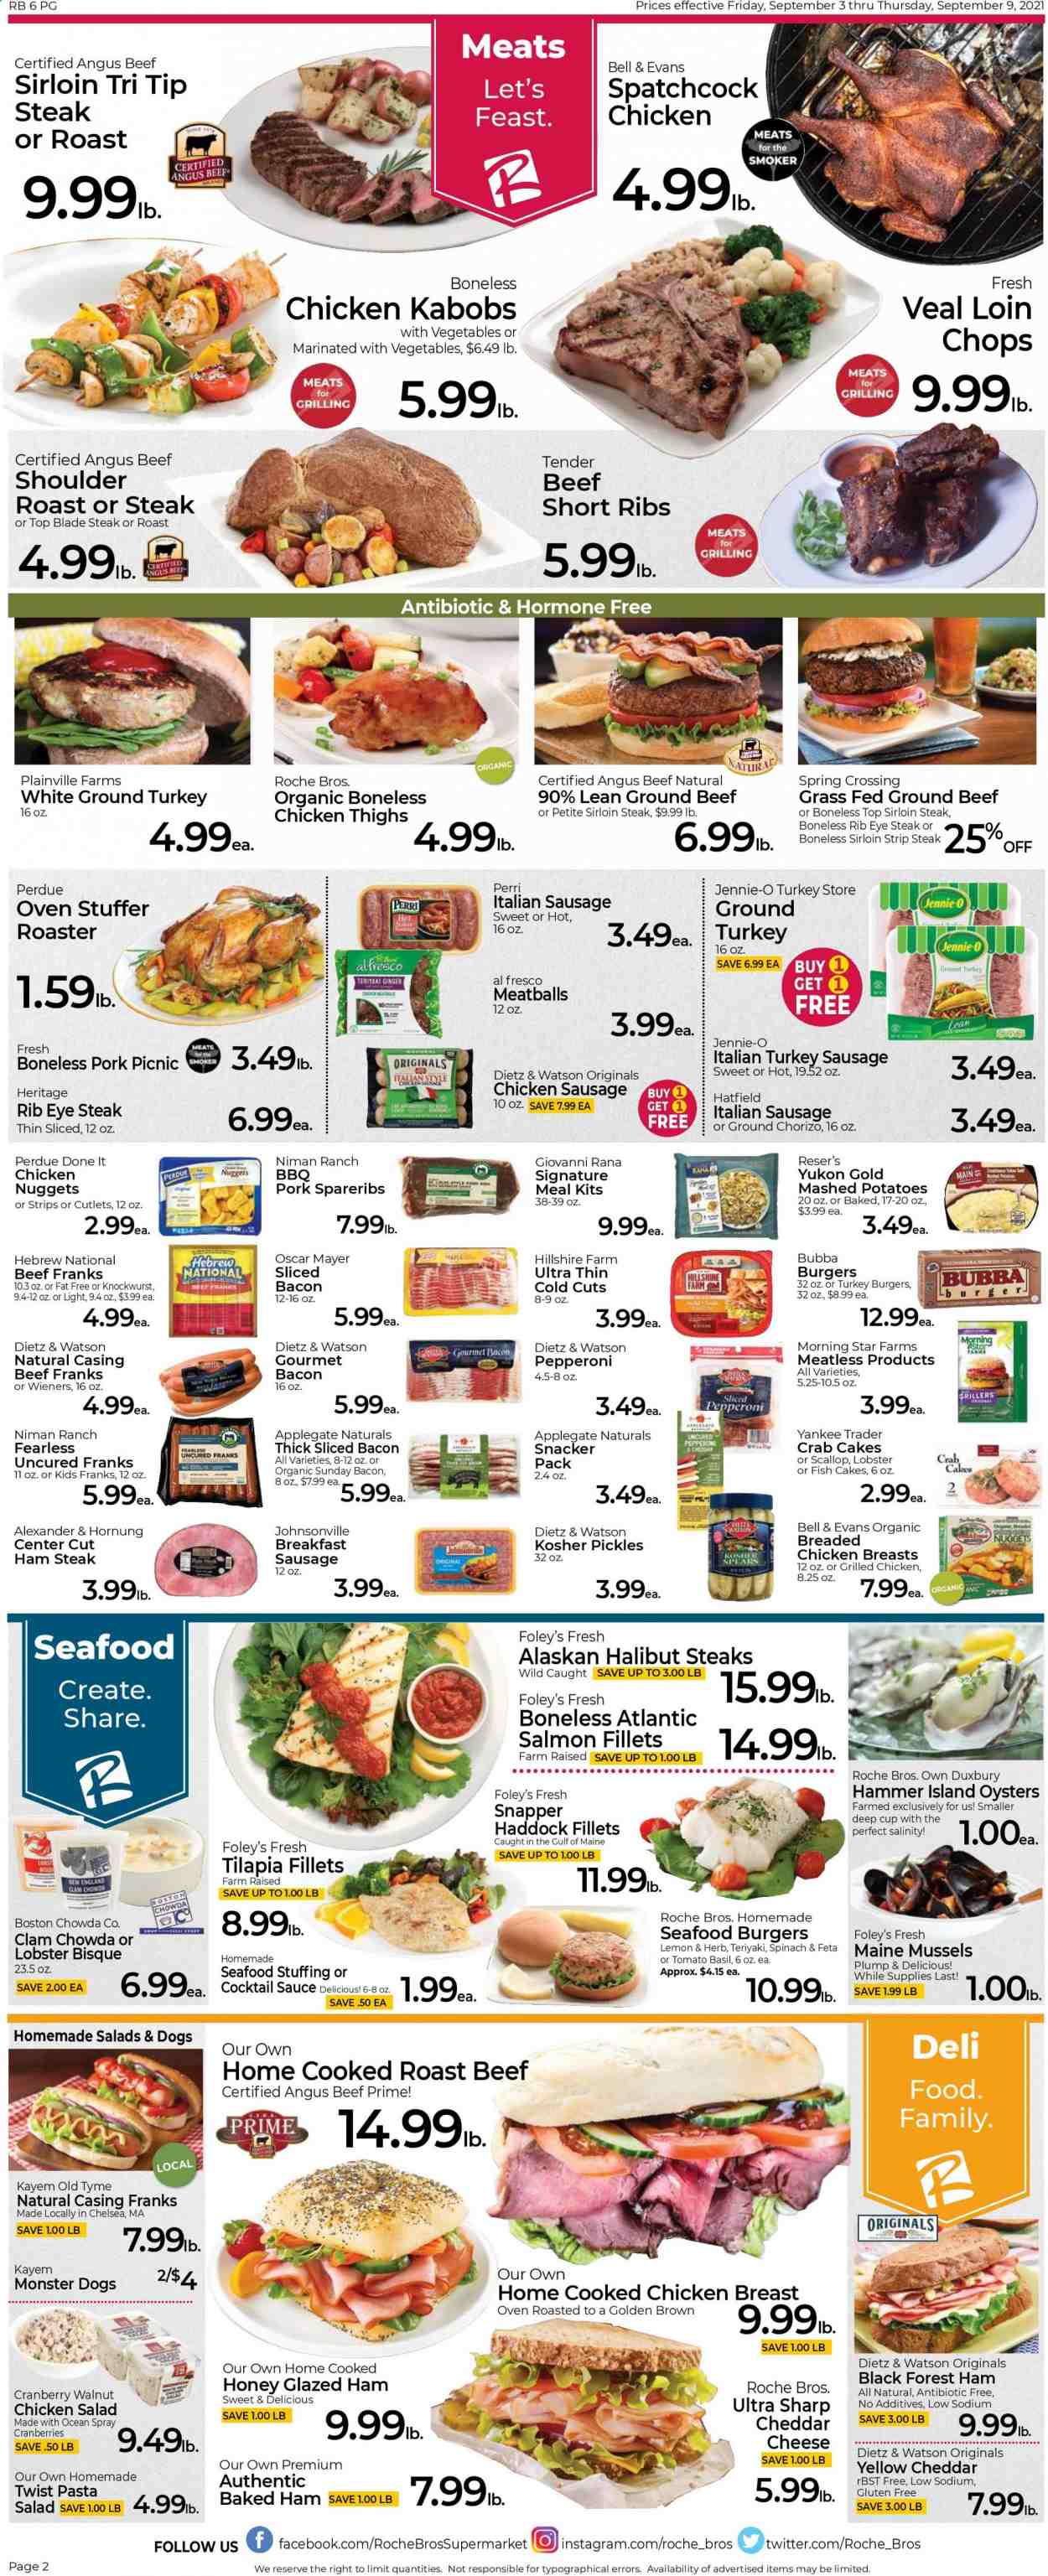 thumbnail - Roche Bros. Flyer - 09/03/2021 - 09/09/2021 - Sales products - salad, clams, lobster, mussels, salmon, salmon fillet, scallops, tilapia, haddock, halibut, oysters, seafood, crab cake, mashed potatoes, meatballs, nuggets, hamburger, pasta, sauce, fried chicken, chicken nuggets, Giovanni Rana, Perdue®, Rana, bacon, ham, Hillshire Farm, chorizo, Johnsonville, Oscar Mayer, Dietz & Watson, sausage, pepperoni, chicken sausage, italian sausage, pasta salad, chicken salad, ham steaks, cheddar, cheese, strips, fish cake, cranberries, pickles, esponja, cocktail sauce, Monster, ground turkey, chicken thighs, spatchcock chicken, beef meat, beef ribs, beef sirloin, ground beef, steak, roast beef, sirloin steak, ribeye steak, striploin steak, top blade, turkey burger, pork spare ribs. Page 2.